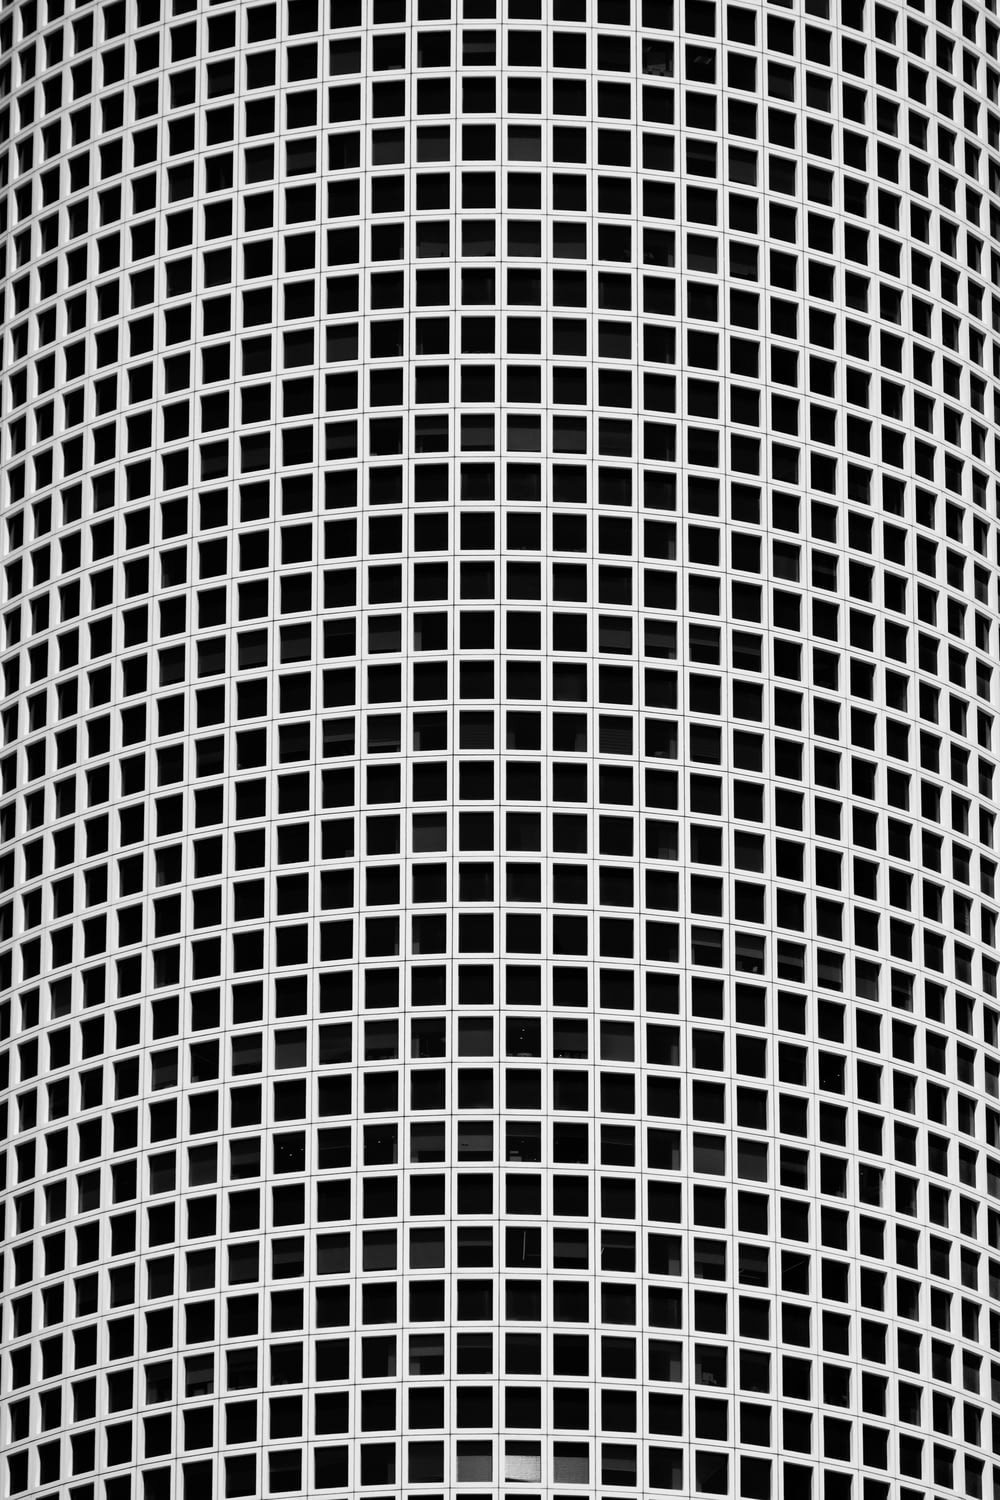 a black and white photo of a speaker